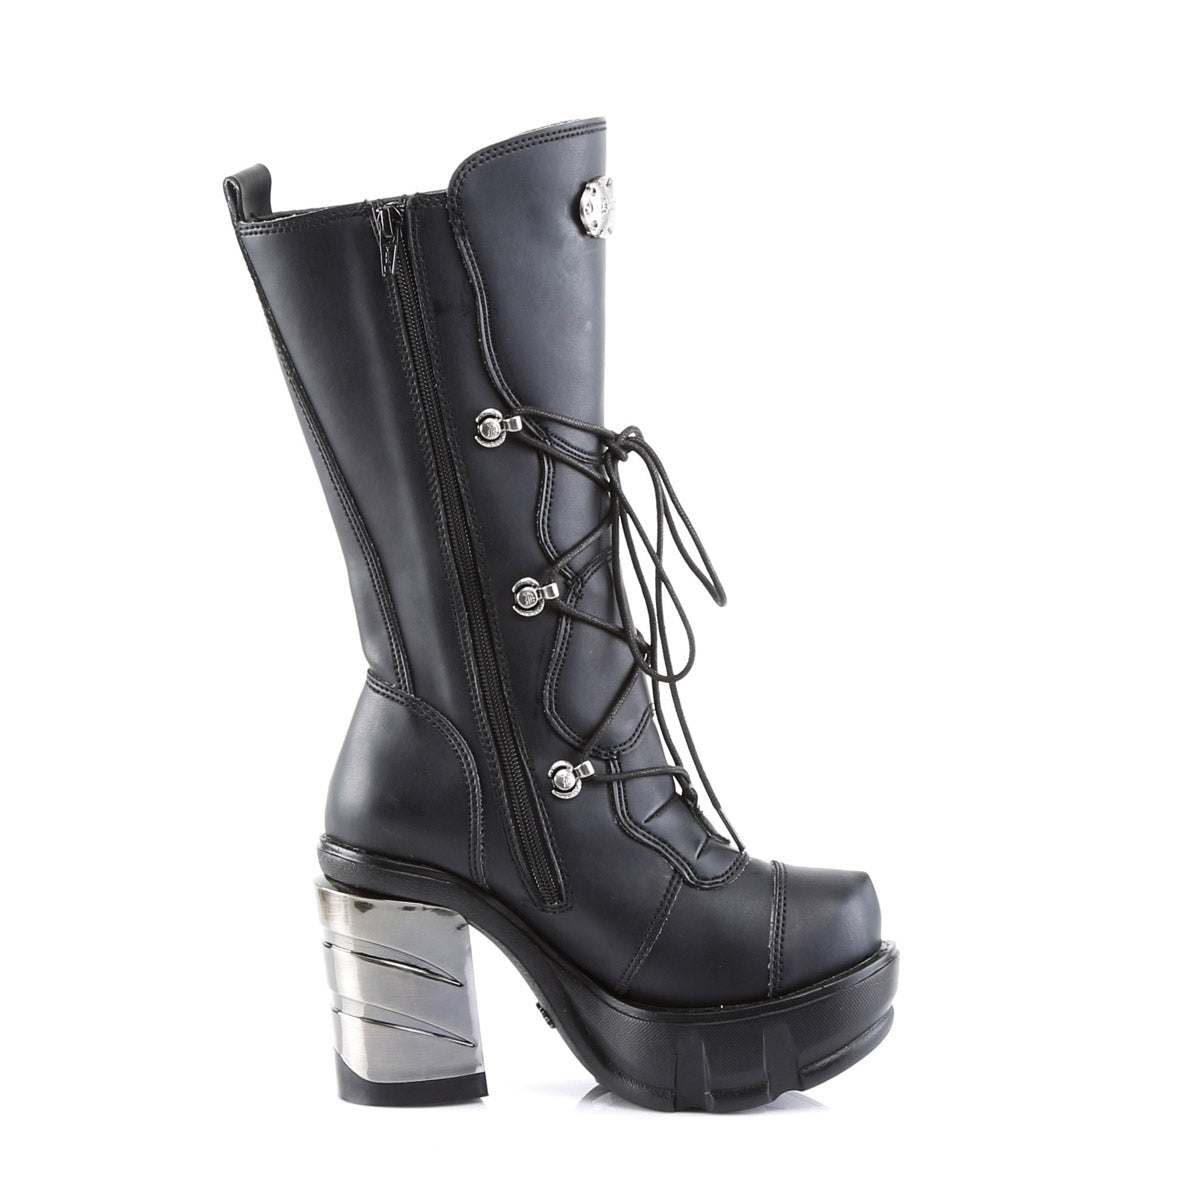 Goth Punk Buckle Strap Mid Calf Lace Up Extreme Platform Boots Shoes Pleaser Demonia SINISTER/203